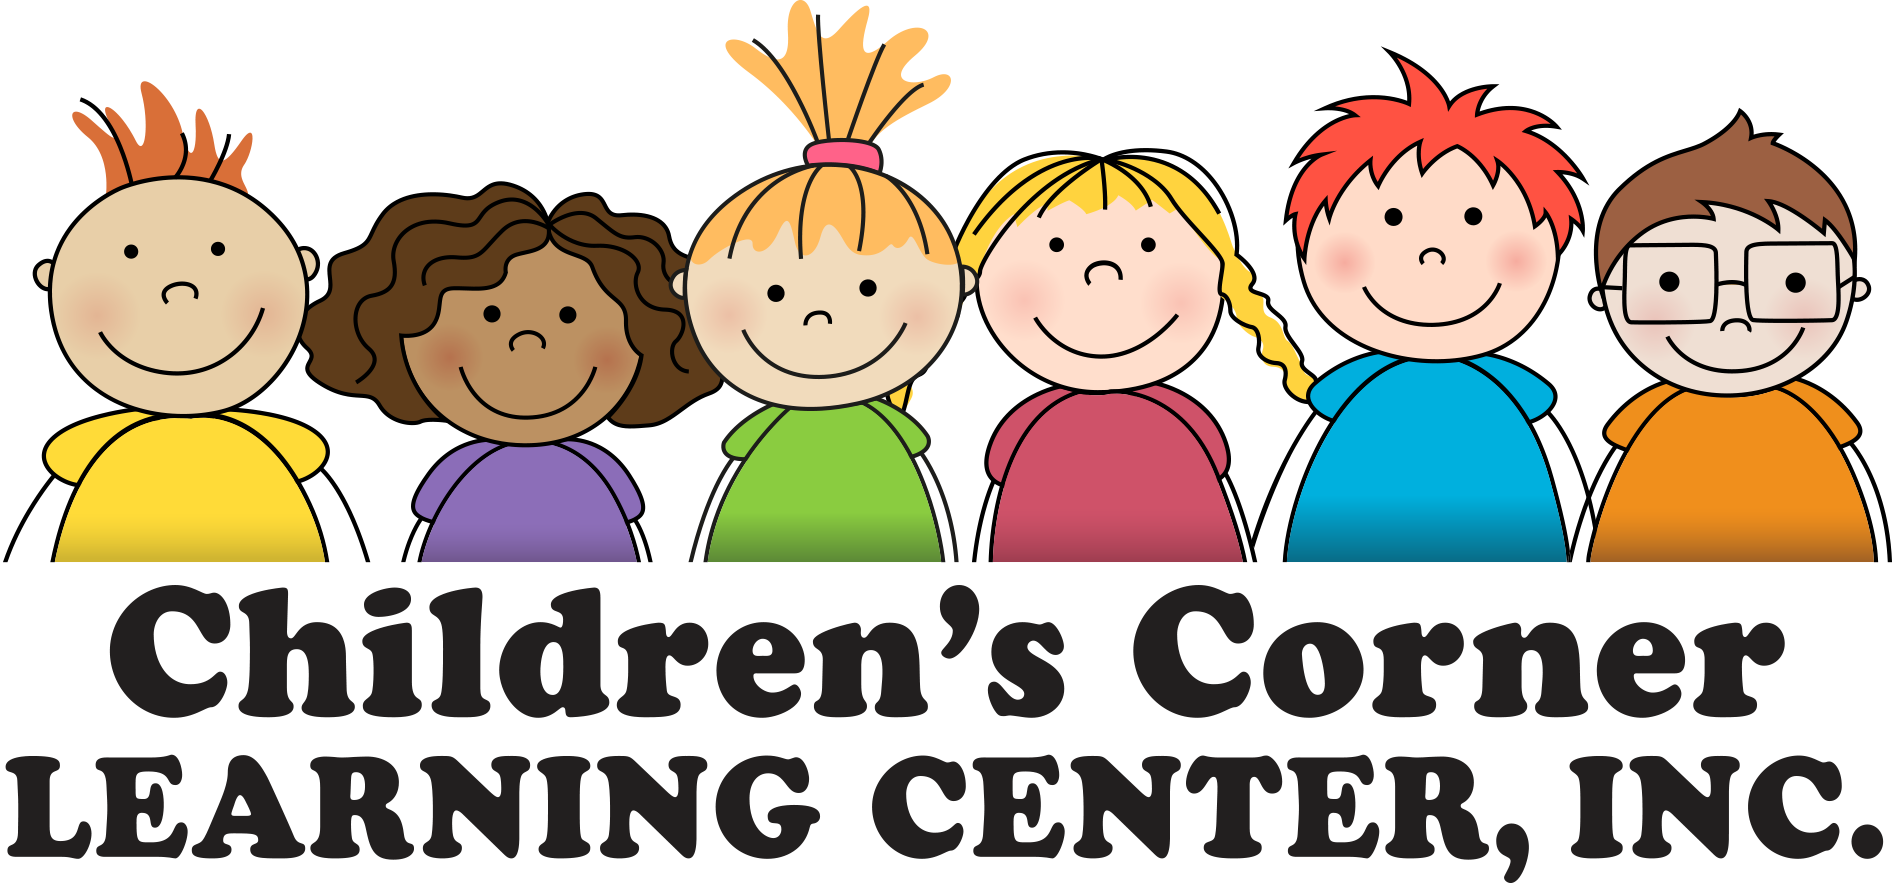 Childrens corner learning center. Excited clipart excited child